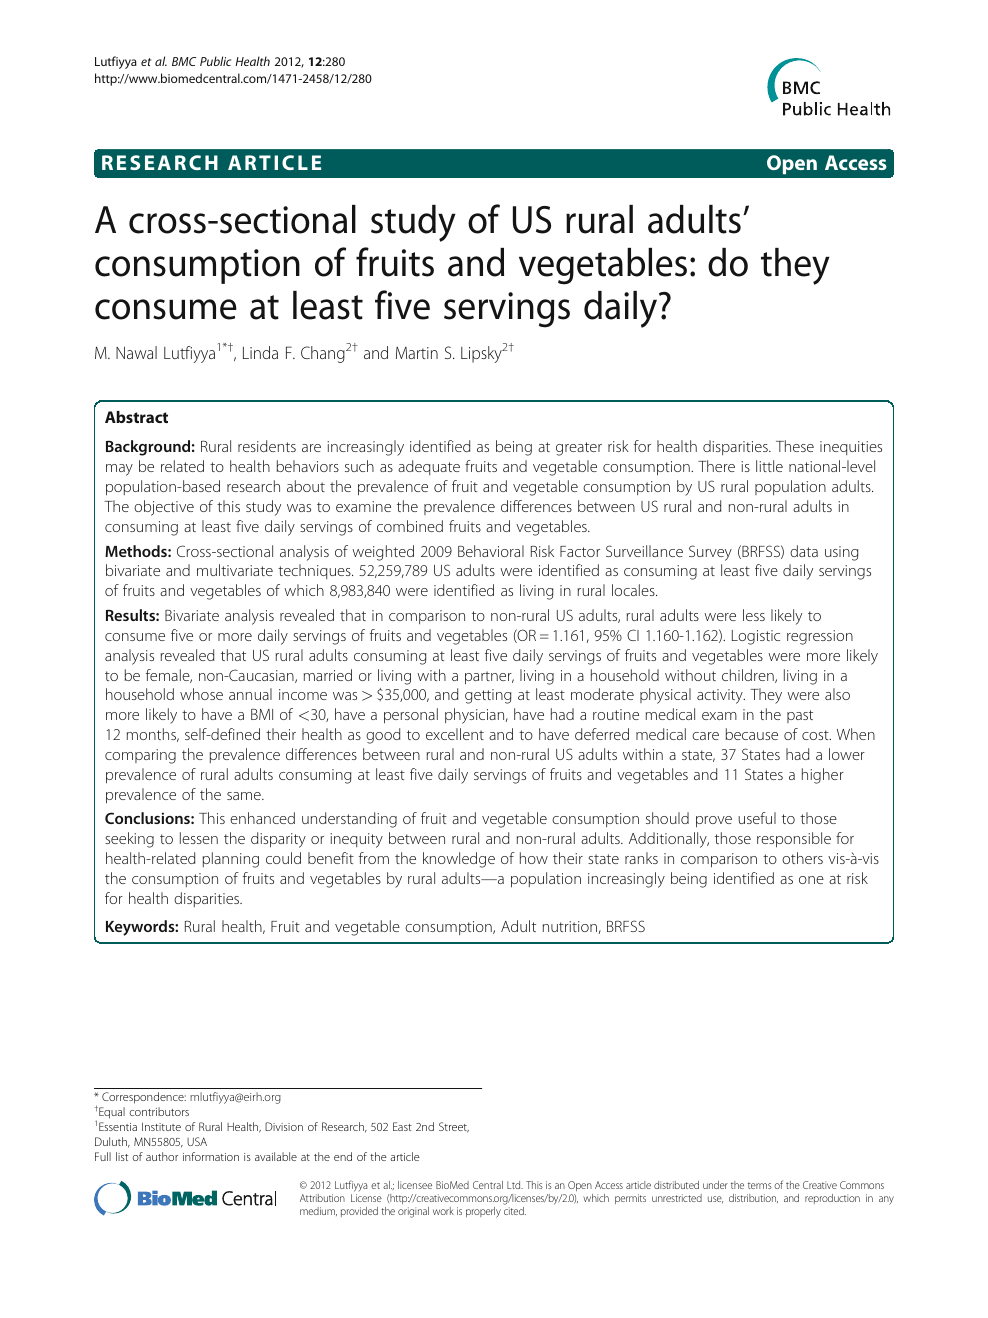 A Cross Sectional Study Of Us Rural Adults Consumption Of Fruits And Vegetables Do They Consume At Least Five Servings Daily Topic Of Research Paper In Health Sciences Download Scholarly Article Pdf